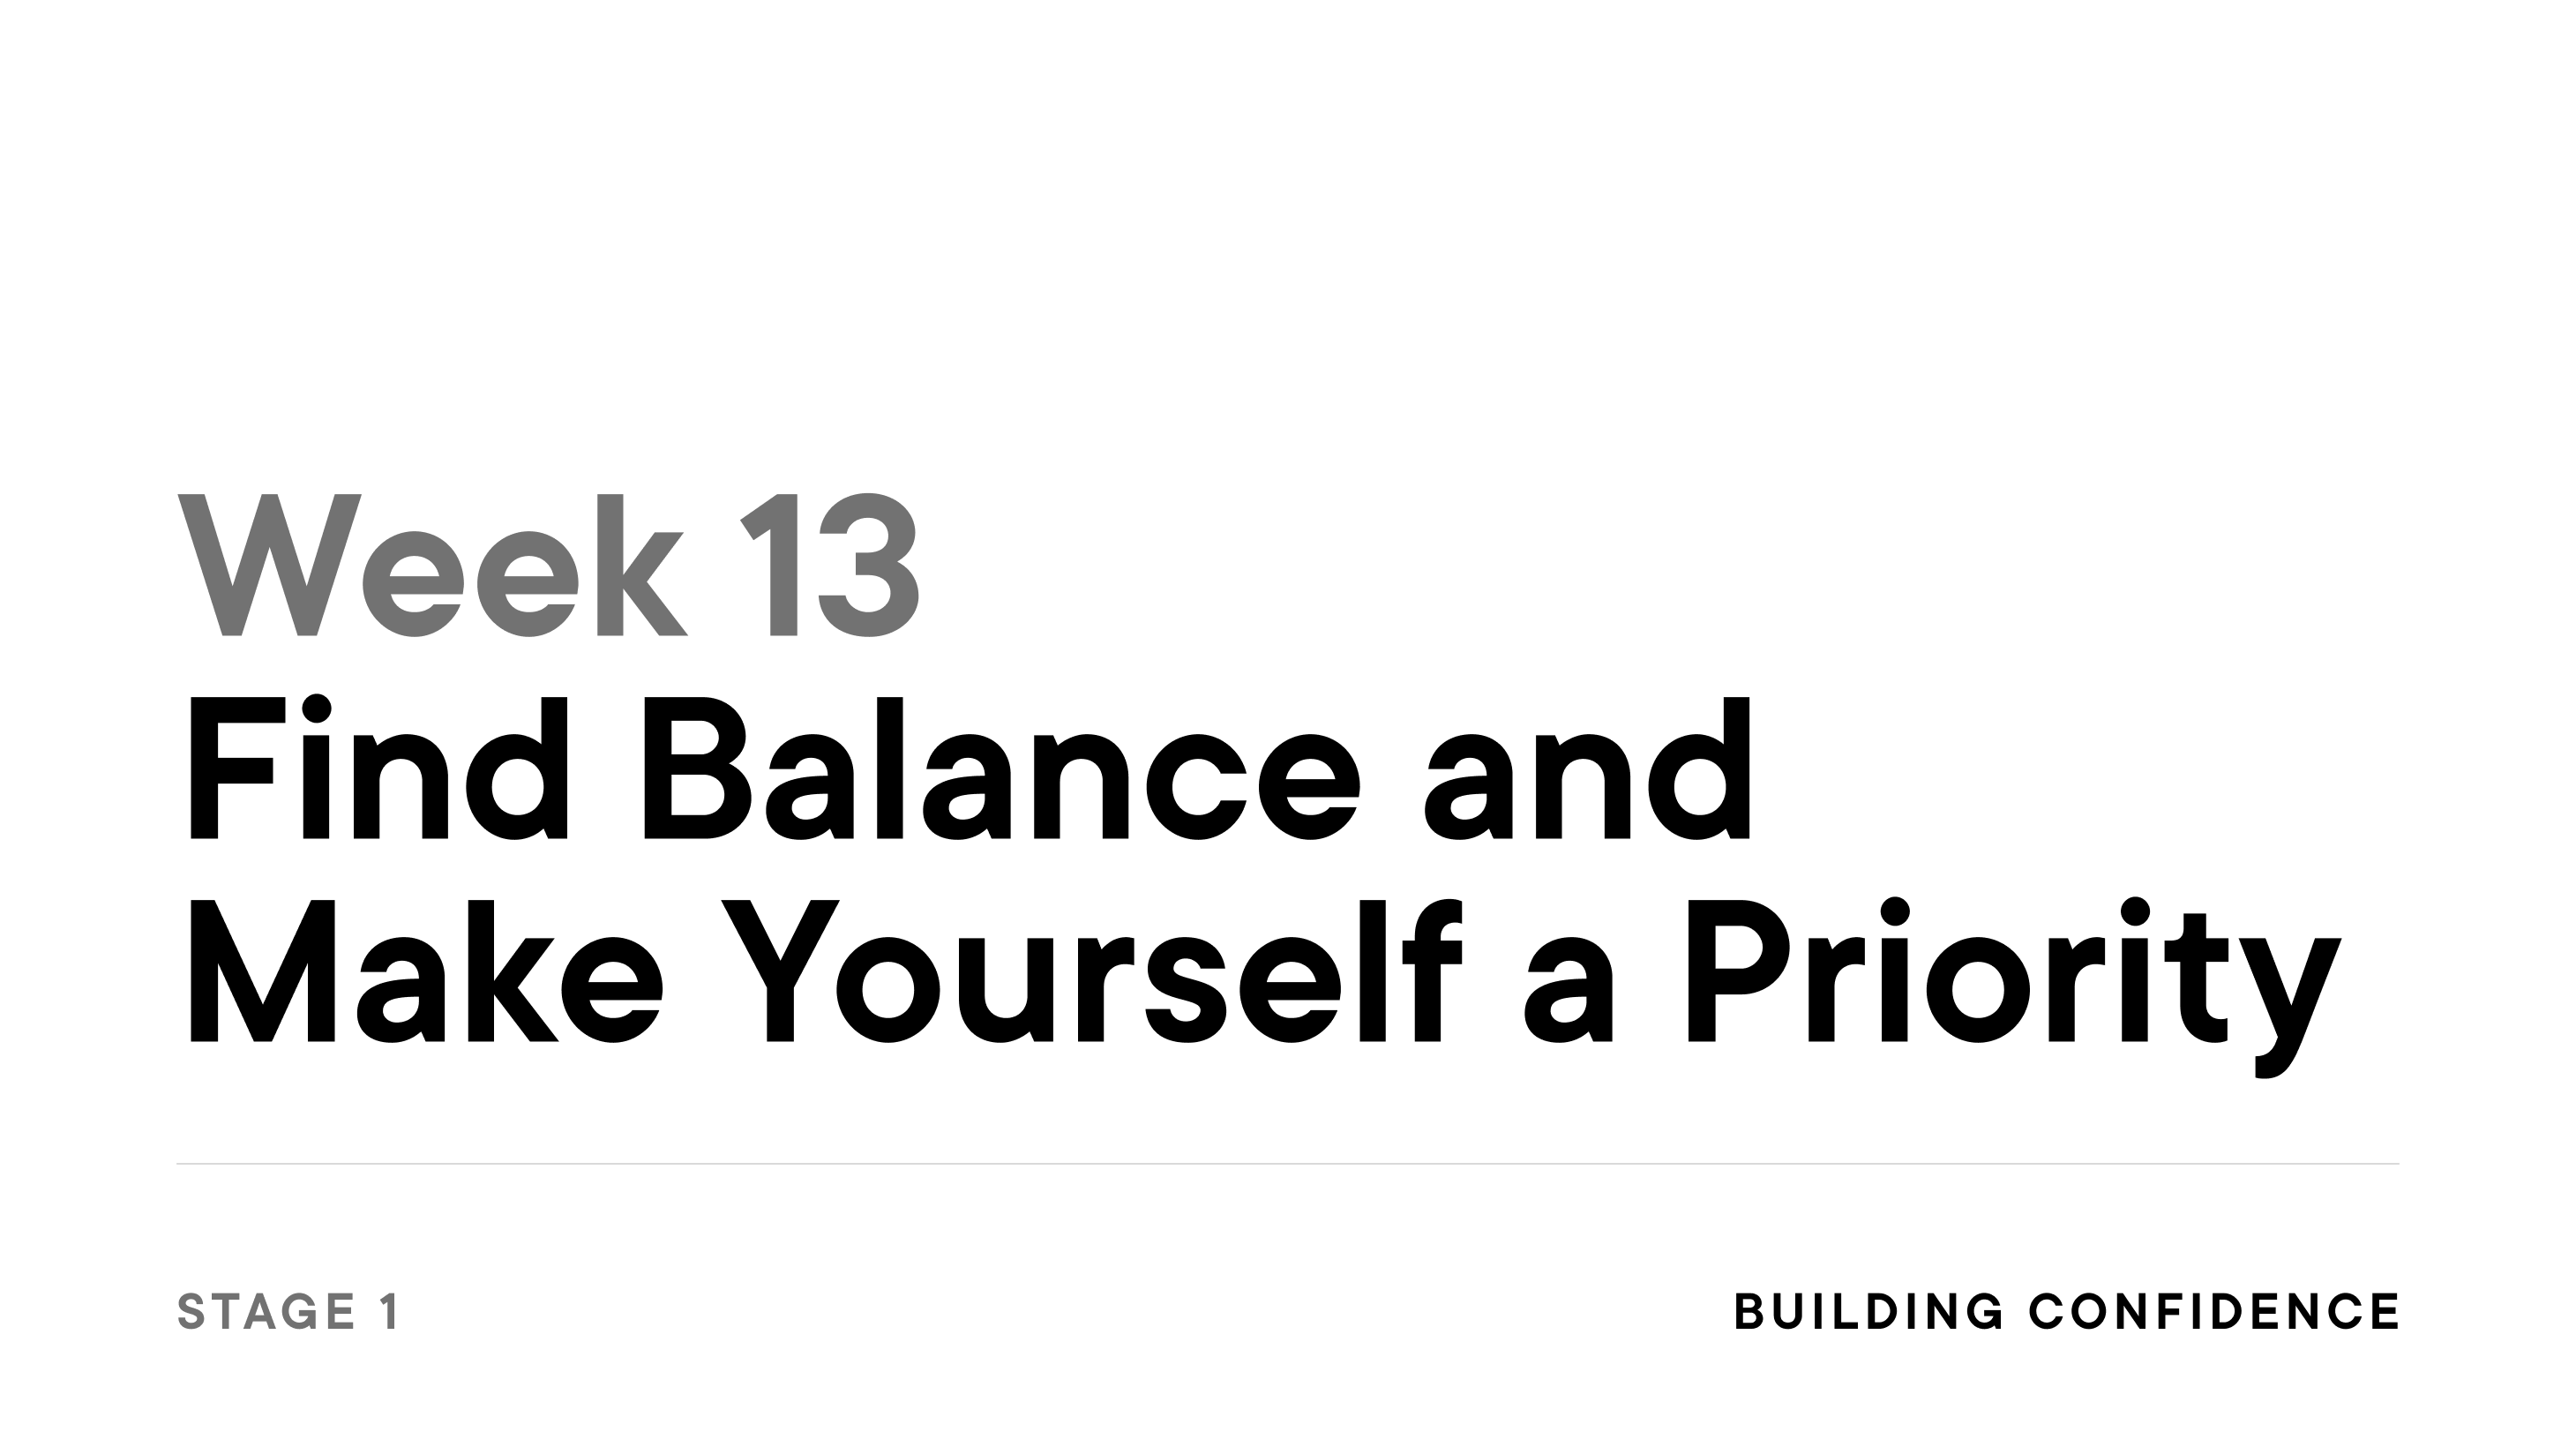 Week 13: Find Balance and Make Yourself a Priority